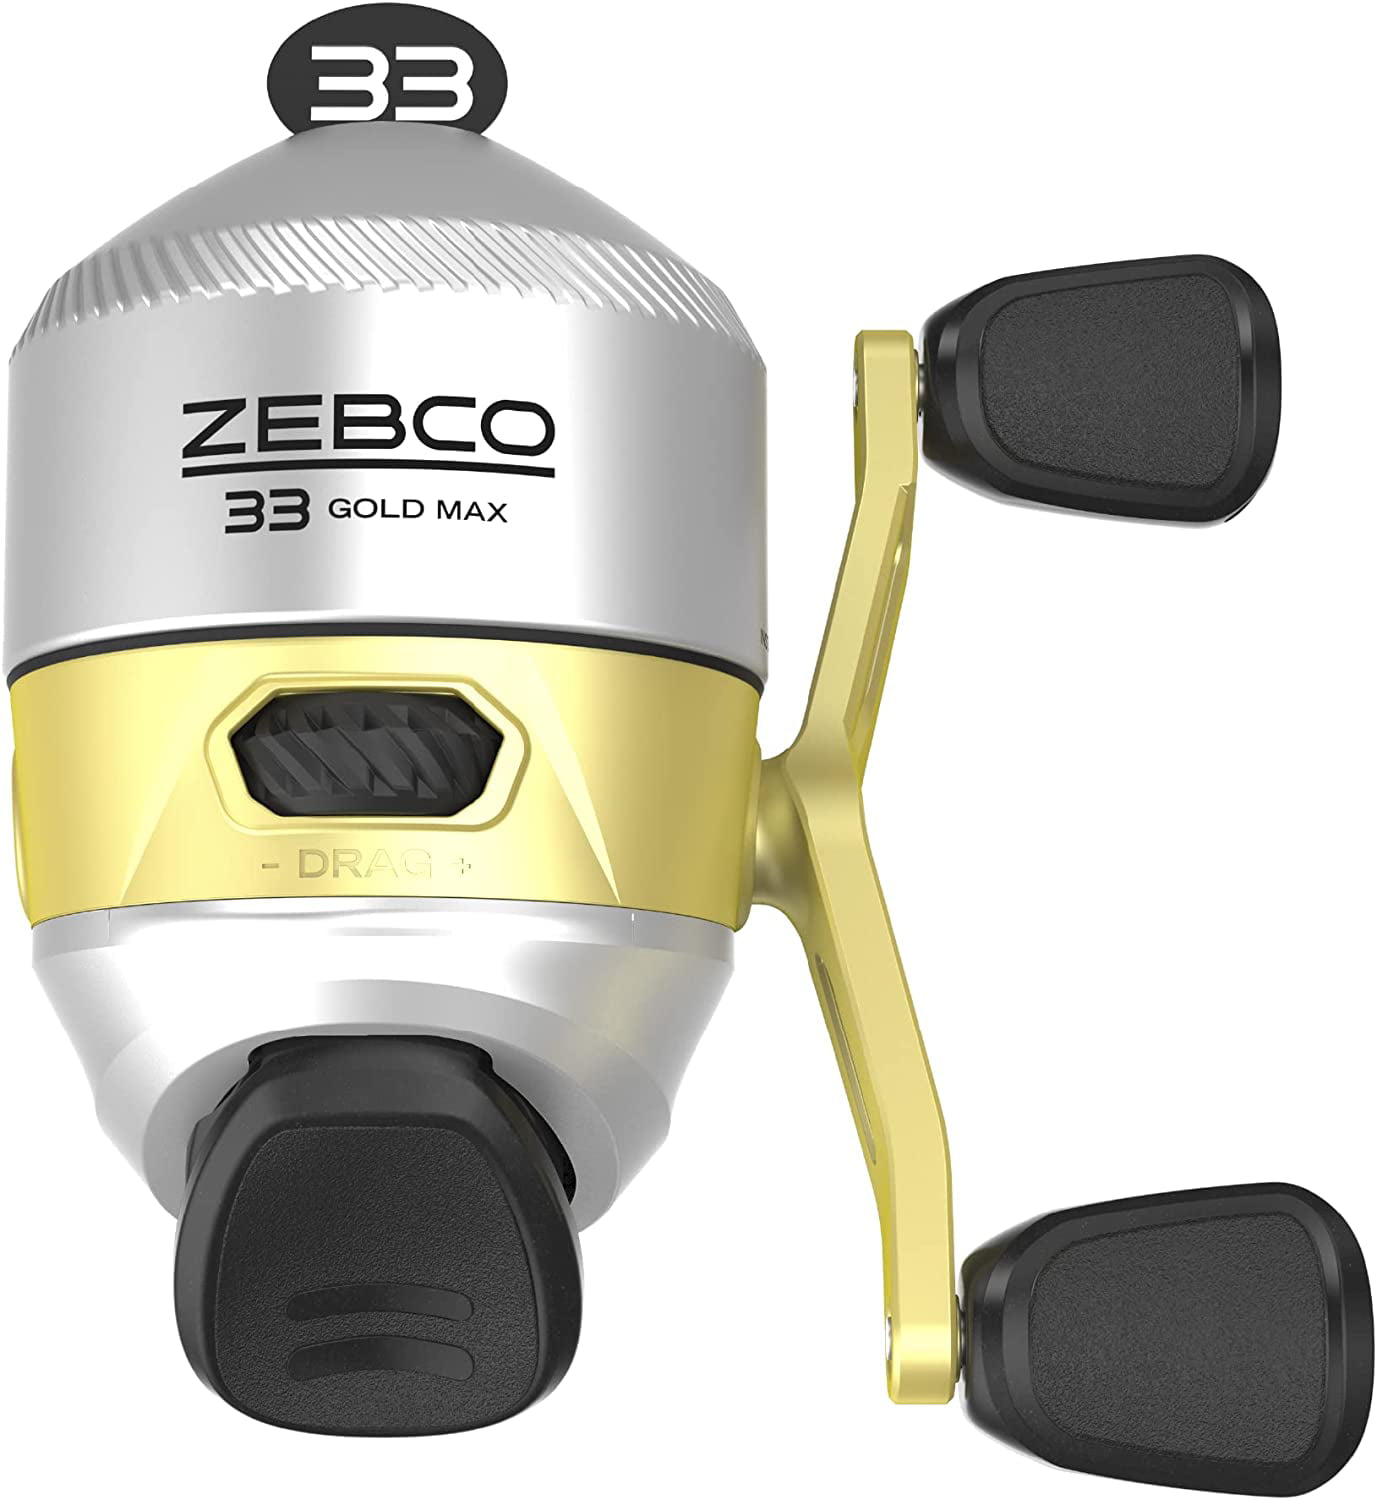 Fishing with Bearings 2.6:1 Dial-Adjustable Spincast 33 Lightweight Ratio Drag, MAX MicroFine Graphite Reel, Silver/Gold and Anti-Reverse, Instant 2+1 Frame Zebco a Smooth Powerful Gear and and a Gold